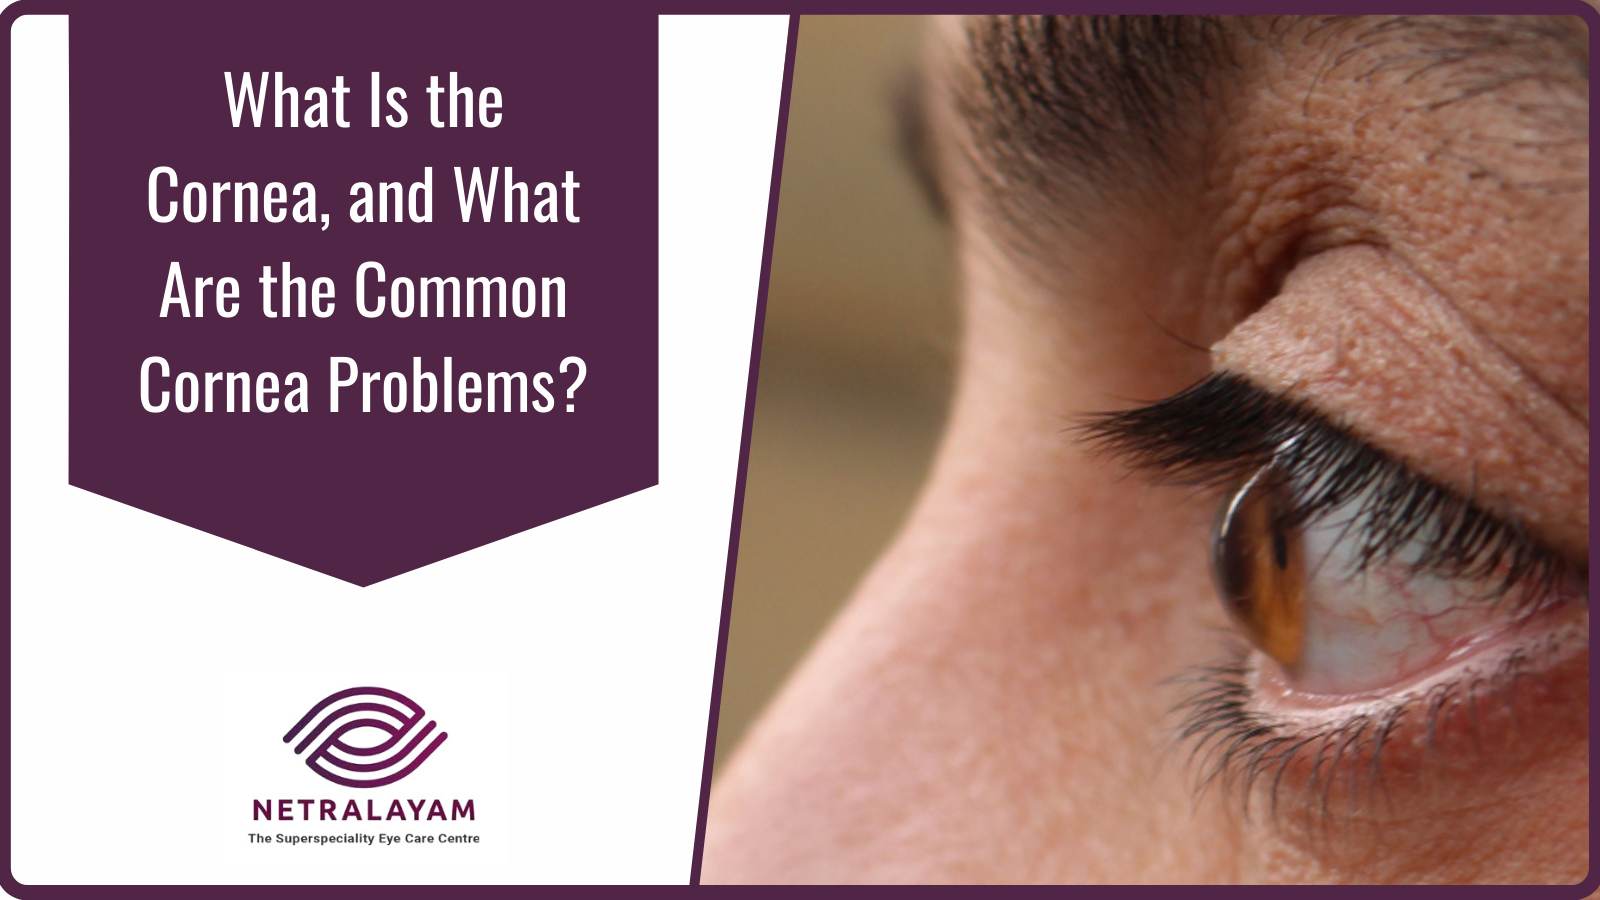 What Is the Cornea, and What Are the Common Cornea Problems?